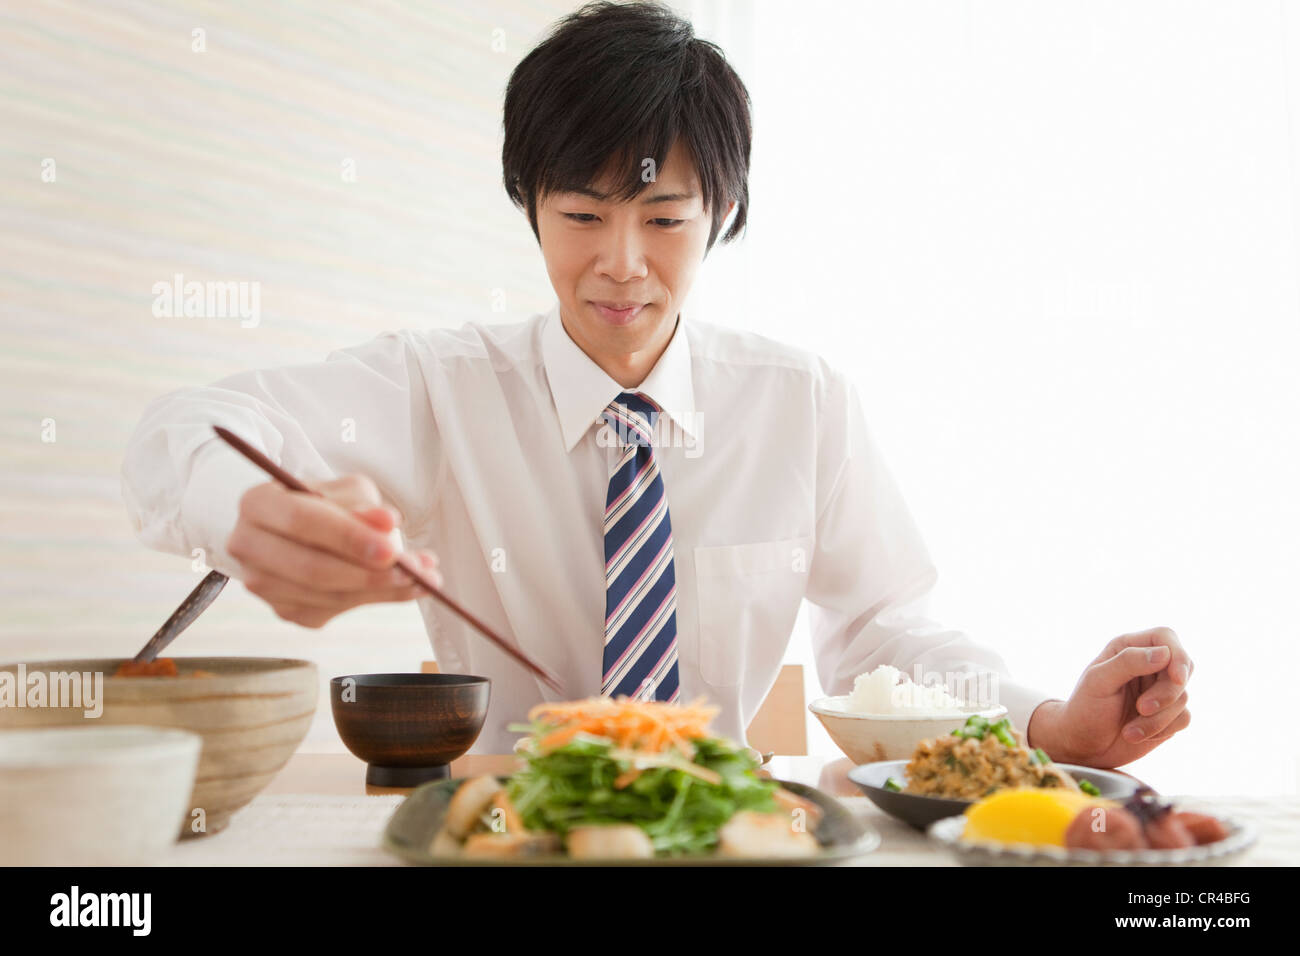 Young Man Eating Breakfast Stock Photo - Alamy